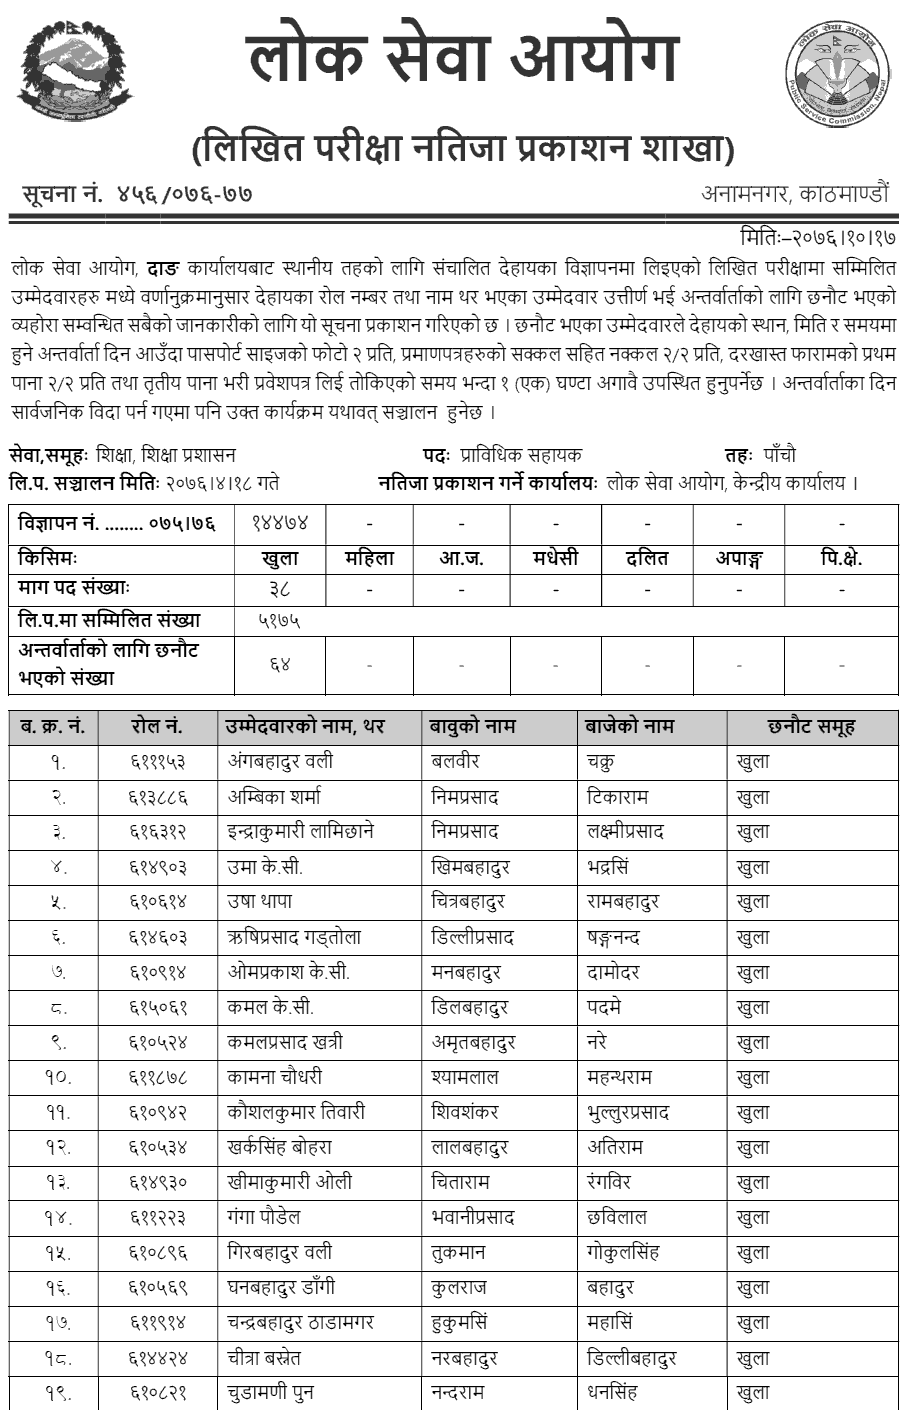 Lok Sewa Aayog Dang Local Level 5th Education Technical Assistant Written Exam Result